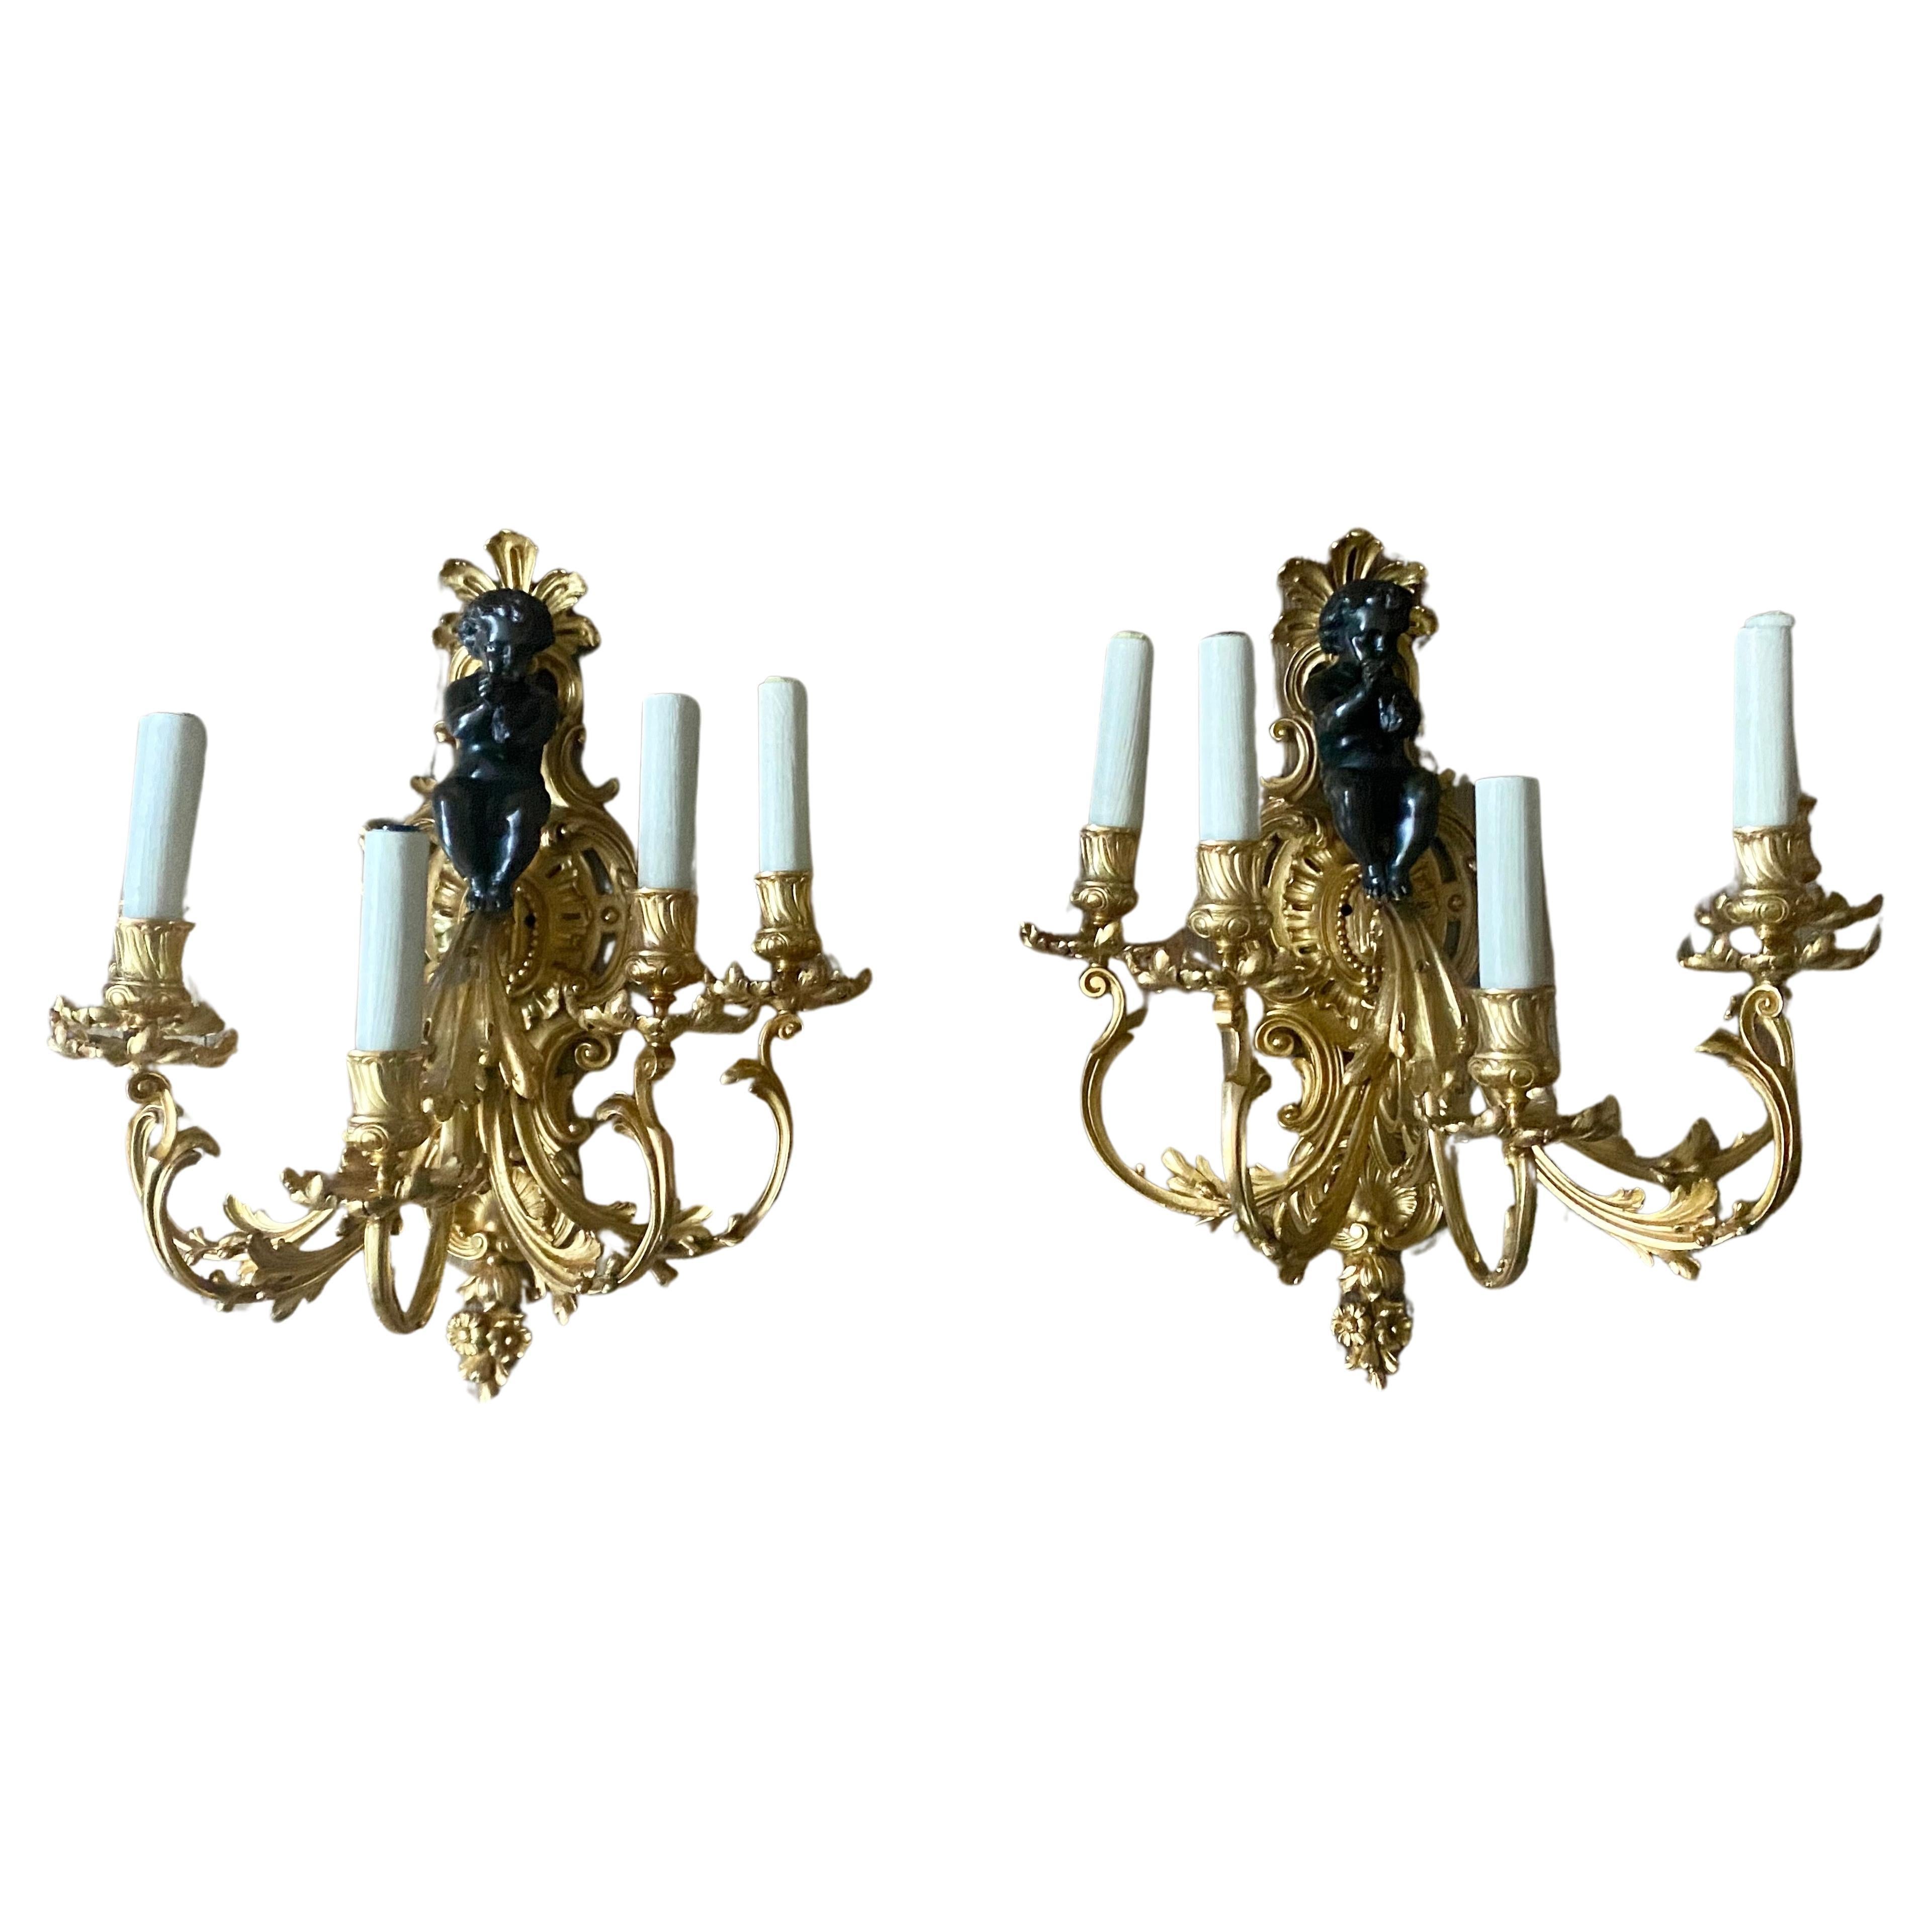 Crafted in the lavish, Louis XV style, these beautiful wall-lights were made in France in the late nineteenth century, and feature five elegant gilt branches that finish in floral motifs which form the lighting mounts..
These are large and palatial